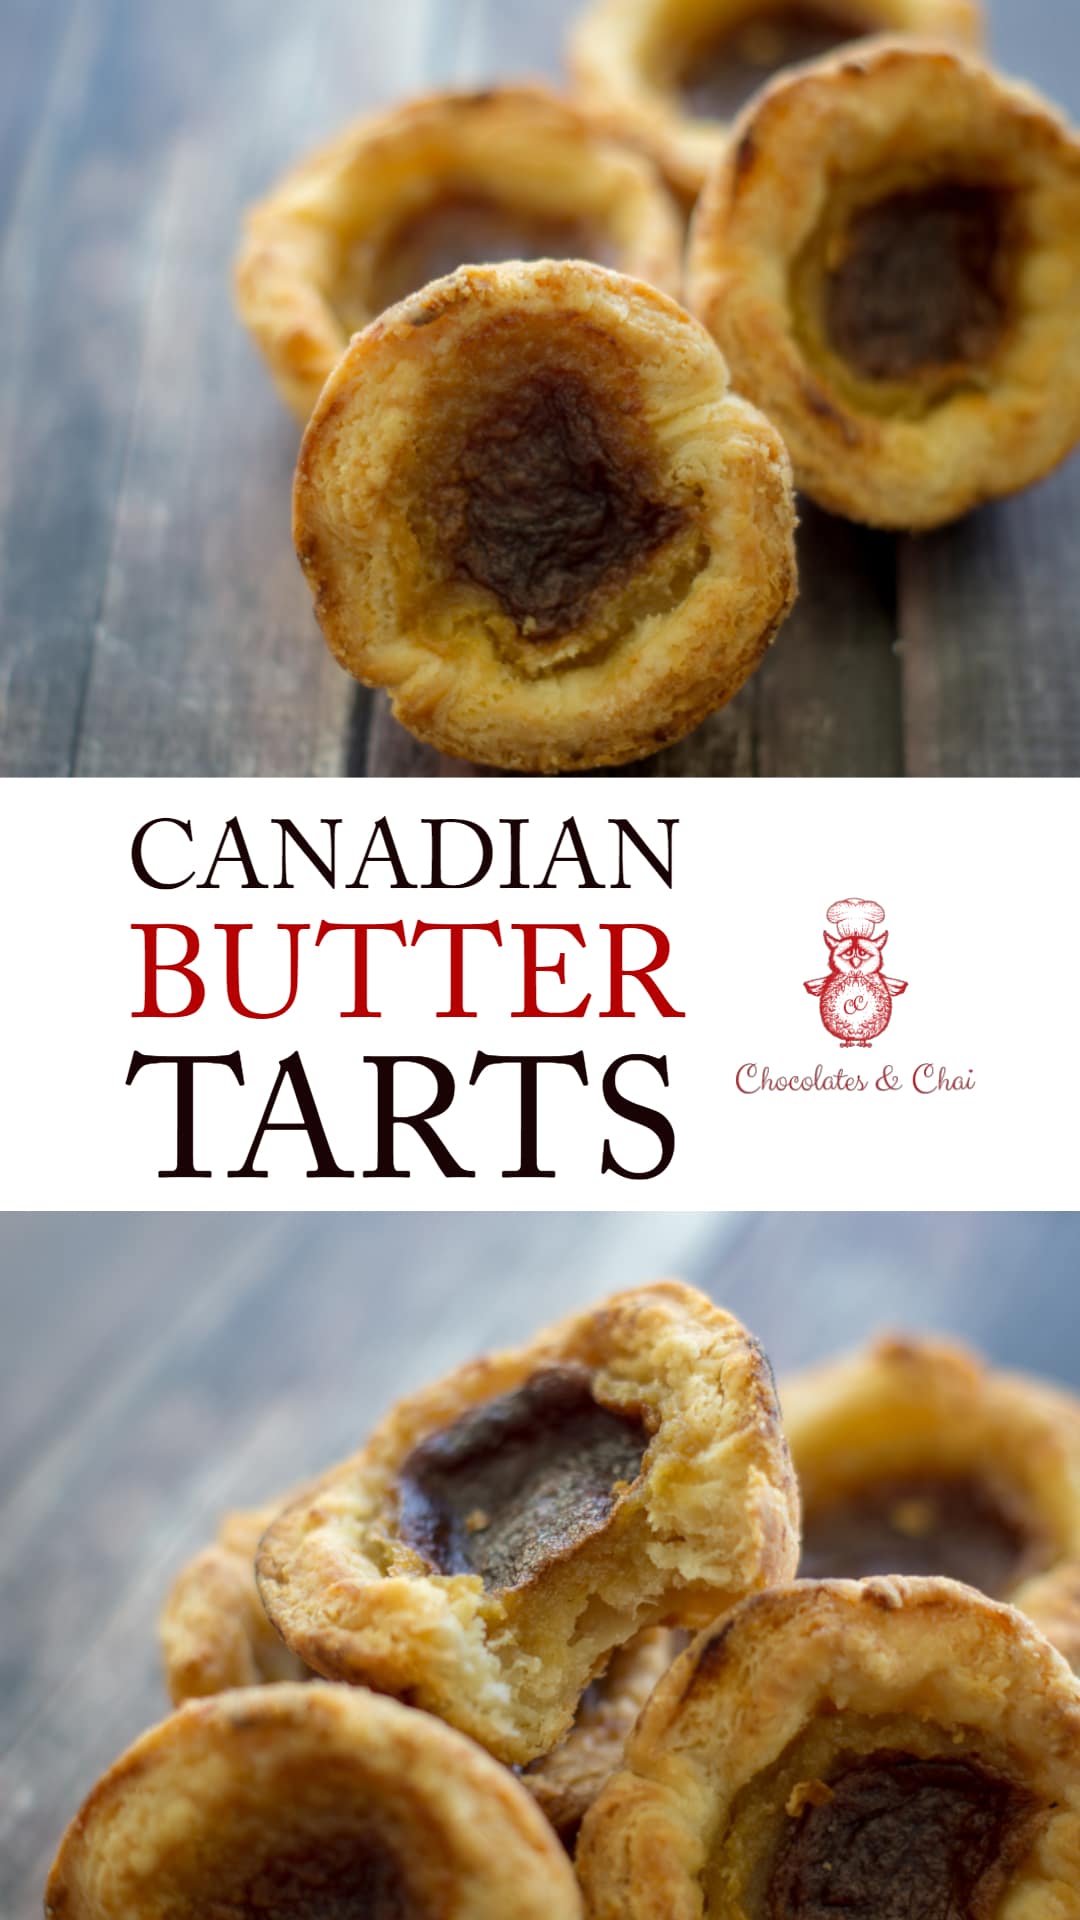 A vertical image with two photos of delicious Canadian butter tarts separated by a title.